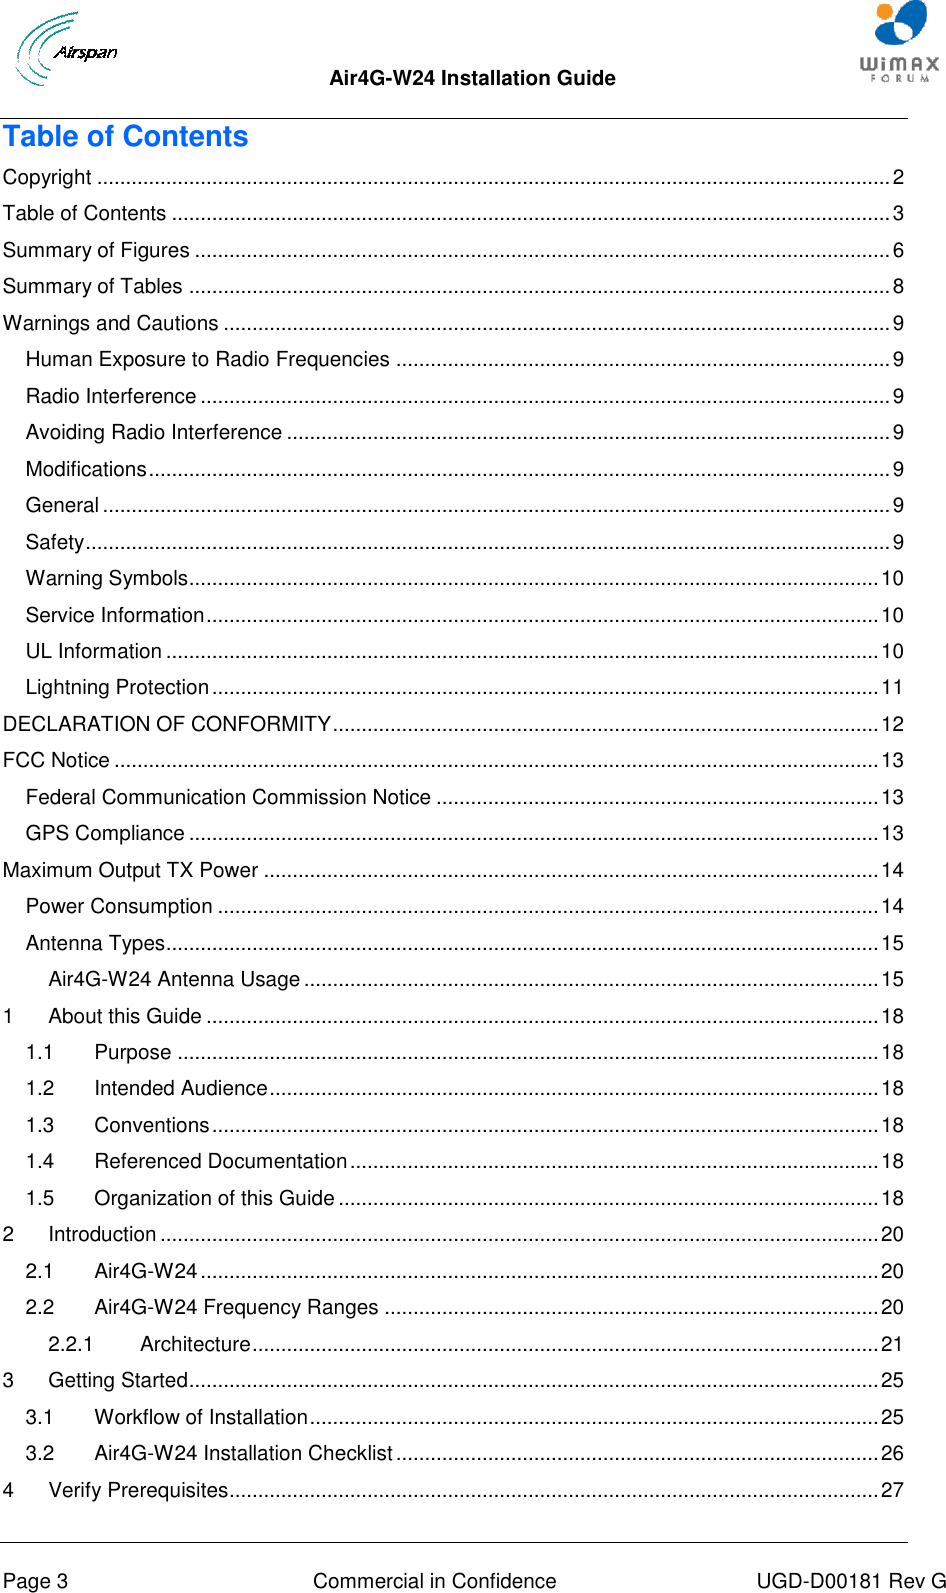  Air4G-W24 Installation Guide       Page 3  Commercial in Confidence  UGD-D00181 Rev G Table of Contents Copyright .......................................................................................................................................... 2 Table of Contents ............................................................................................................................. 3 Summary of Figures ......................................................................................................................... 6 Summary of Tables .......................................................................................................................... 8 Warnings and Cautions .................................................................................................................... 9 Human Exposure to Radio Frequencies ...................................................................................... 9 Radio Interference ........................................................................................................................ 9 Avoiding Radio Interference ......................................................................................................... 9 Modifications ................................................................................................................................. 9 General ......................................................................................................................................... 9 Safety ............................................................................................................................................ 9 Warning Symbols........................................................................................................................ 10 Service Information ..................................................................................................................... 10 UL Information ............................................................................................................................ 10 Lightning Protection .................................................................................................................... 11 DECLARATION OF CONFORMITY ............................................................................................... 12 FCC Notice ..................................................................................................................................... 13 Federal Communication Commission Notice ............................................................................. 13 GPS Compliance ........................................................................................................................ 13 Maximum Output TX Power ........................................................................................................... 14 Power Consumption ................................................................................................................... 14 Antenna Types............................................................................................................................ 15 Air4G-W24 Antenna Usage .................................................................................................... 15 1 About this Guide ..................................................................................................................... 18 1.1 Purpose .......................................................................................................................... 18 1.2 Intended Audience .......................................................................................................... 18 1.3 Conventions .................................................................................................................... 18 1.4 Referenced Documentation ............................................................................................ 18 1.5 Organization of this Guide .............................................................................................. 18 2 Introduction ............................................................................................................................. 20 2.1 Air4G-W24 ...................................................................................................................... 20 2.2 Air4G-W24 Frequency Ranges ...................................................................................... 20 2.2.1 Architecture ............................................................................................................. 21 3 Getting Started ........................................................................................................................ 25 3.1 Workflow of Installation ................................................................................................... 25 3.2 Air4G-W24 Installation Checklist .................................................................................... 26 4 Verify Prerequisites................................................................................................................. 27 